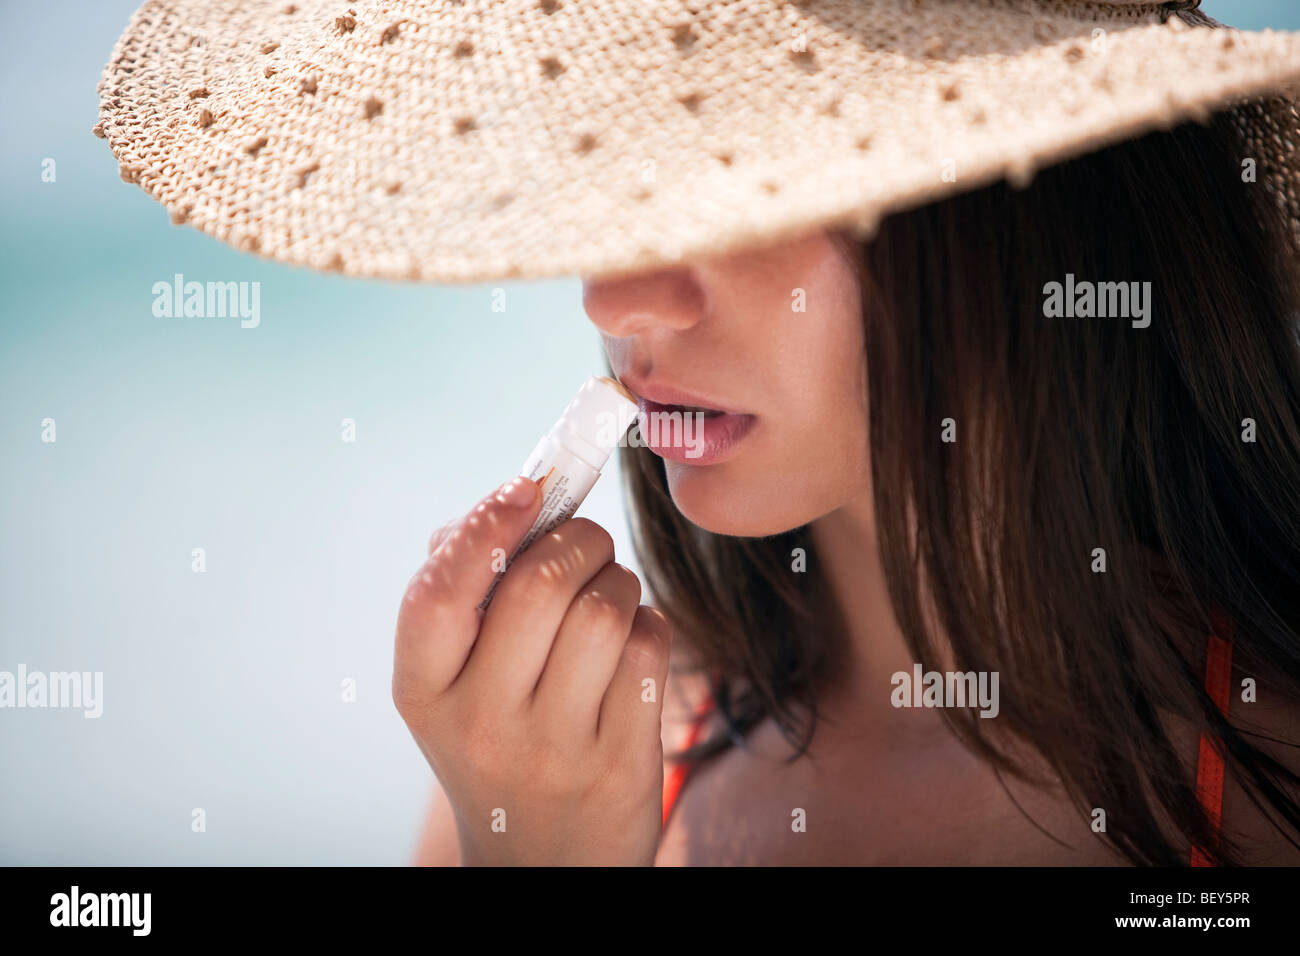 young woman wearing a straw hat, holding lip balm Stock Photo